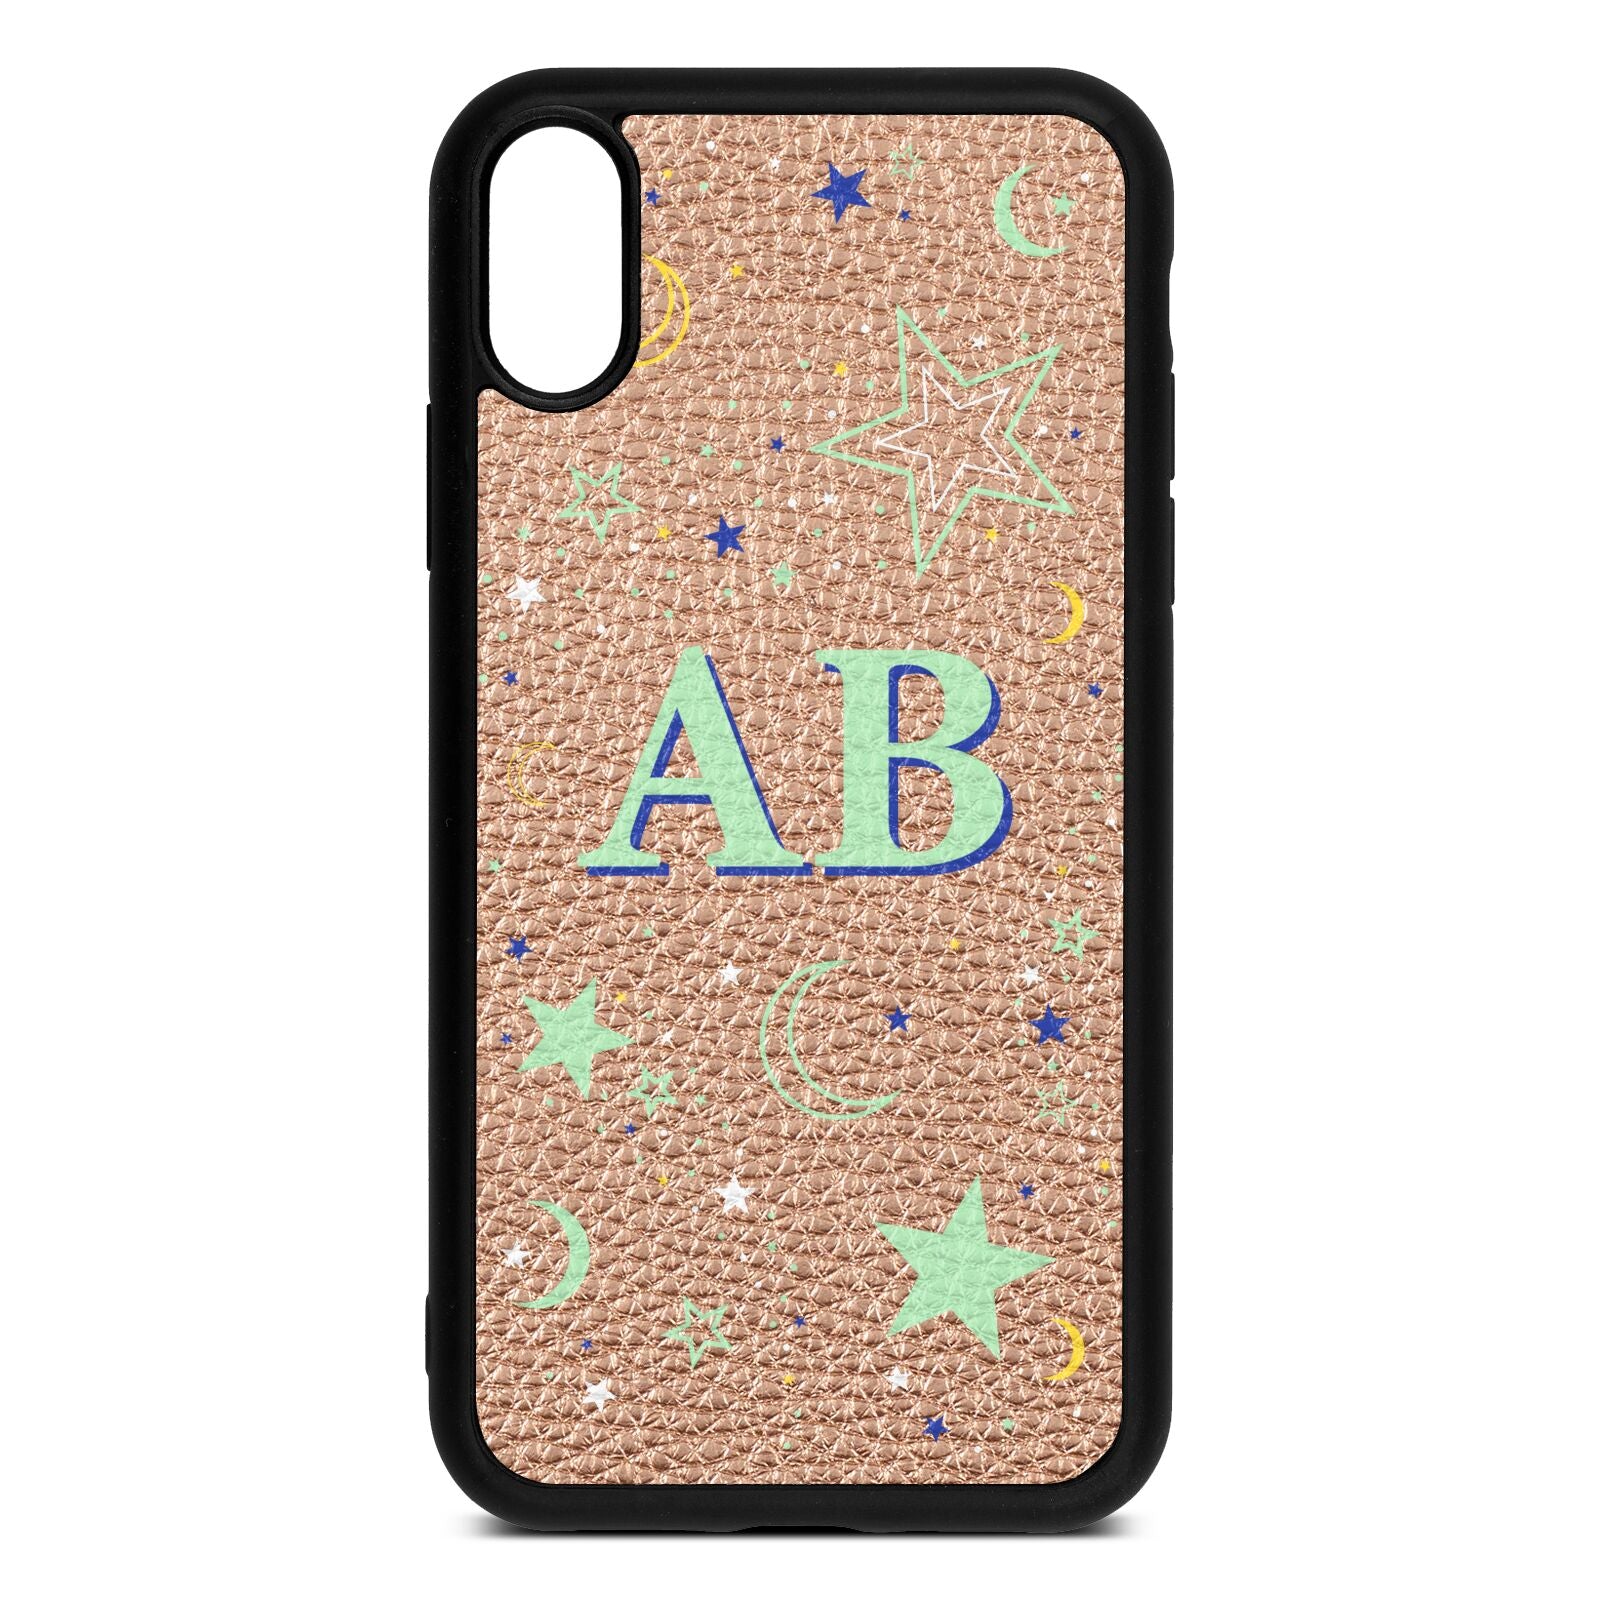 Stars and Moon Personalised Rose Gold Pebble Leather iPhone Xr Case